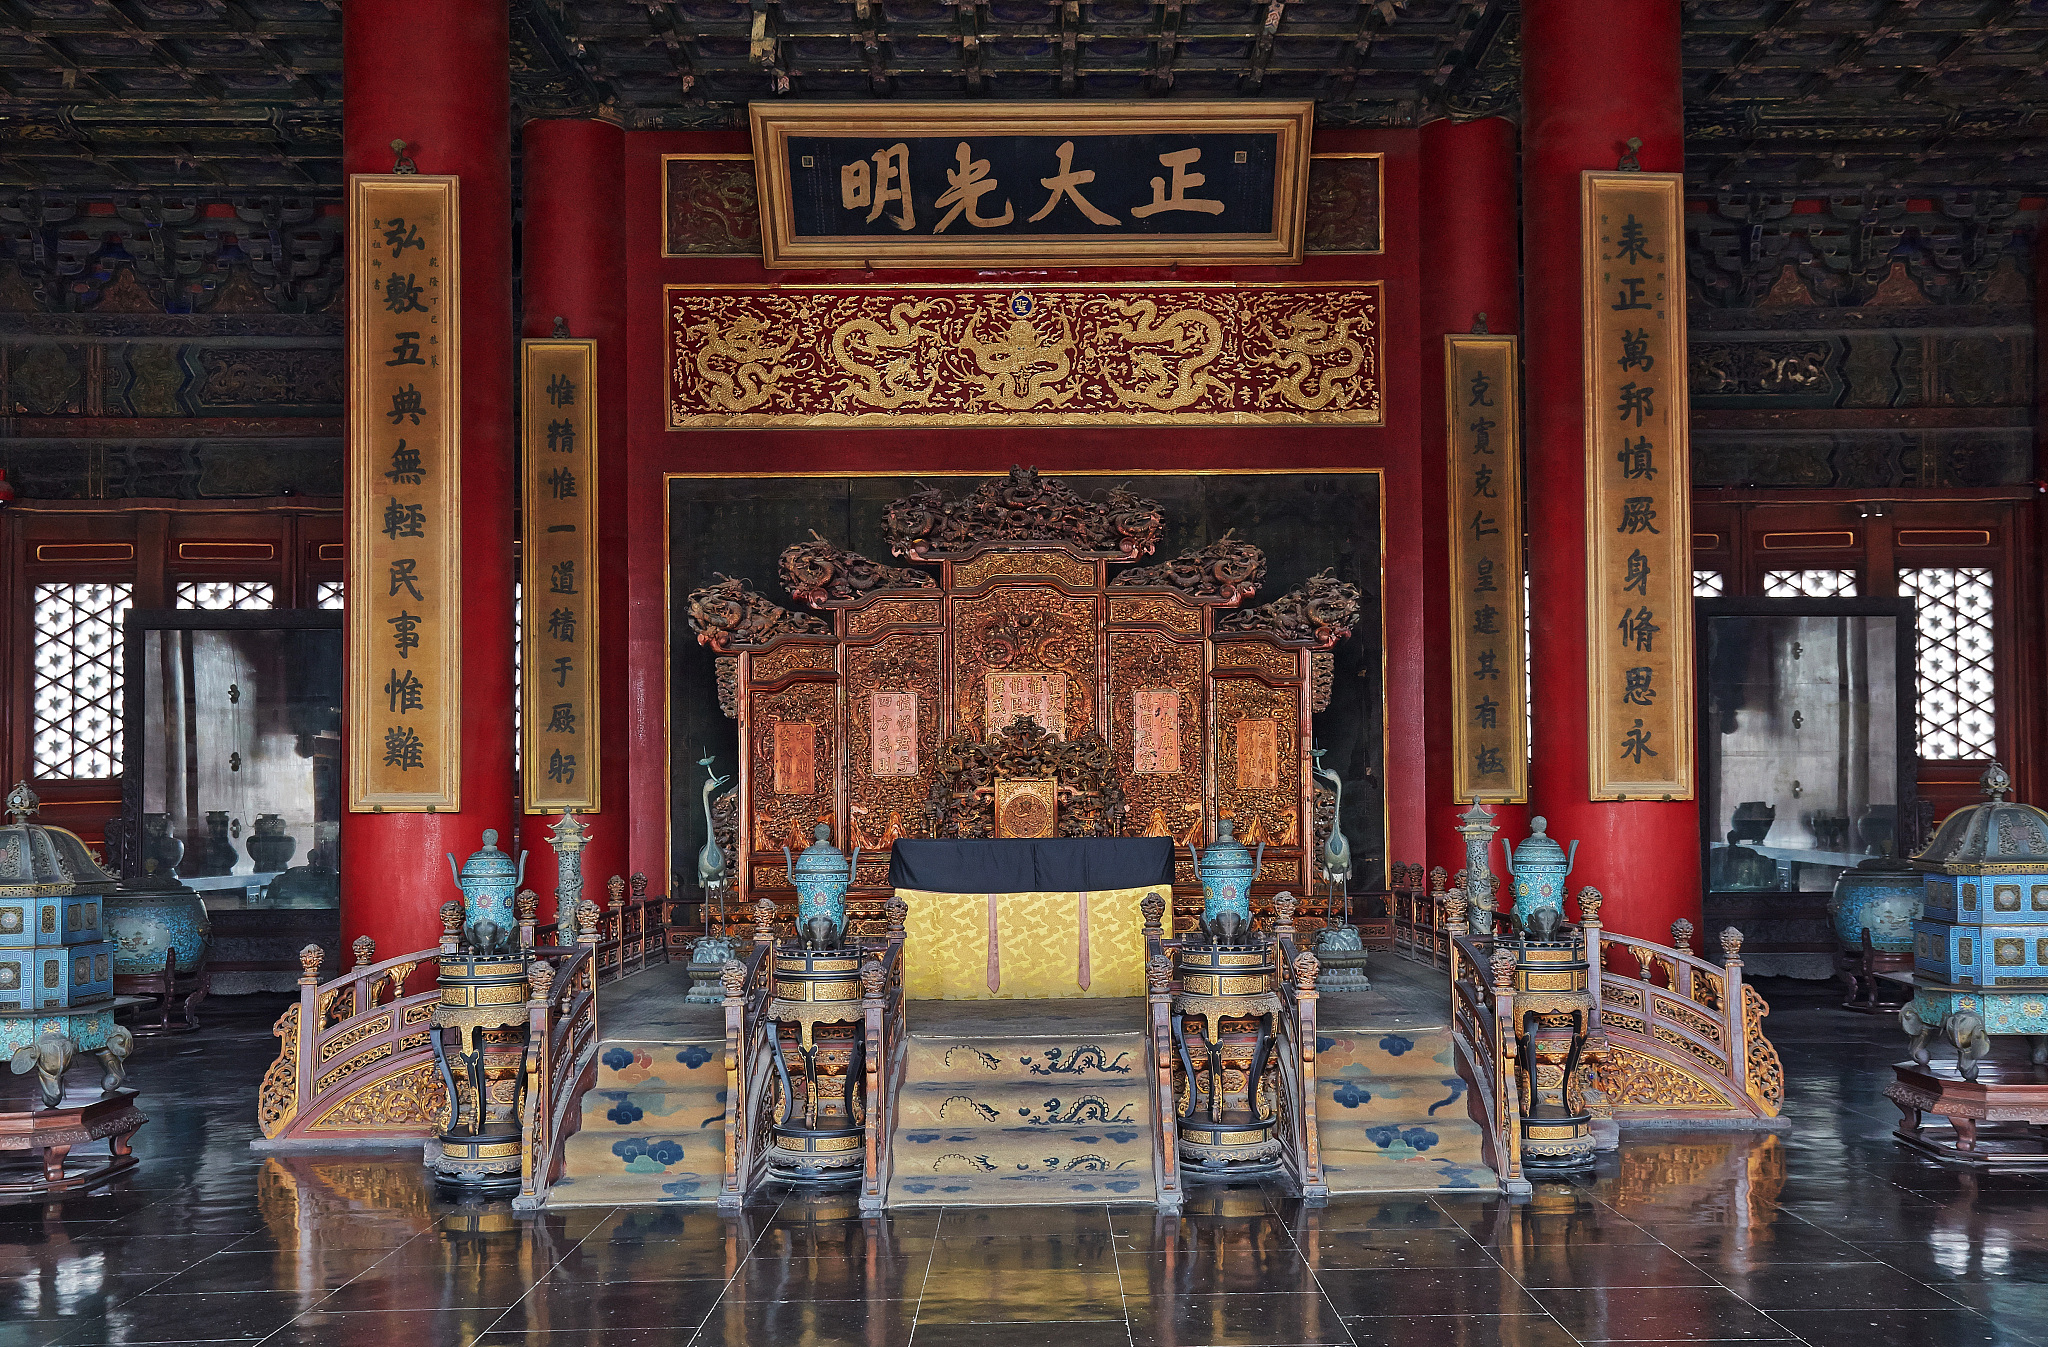 A file photo shows the emperor's seat inside the Qianqing Gong, or Palace of Heavenly Purity, which was the emperor's bedroom in the Forbidden City in Beijing. /CFP